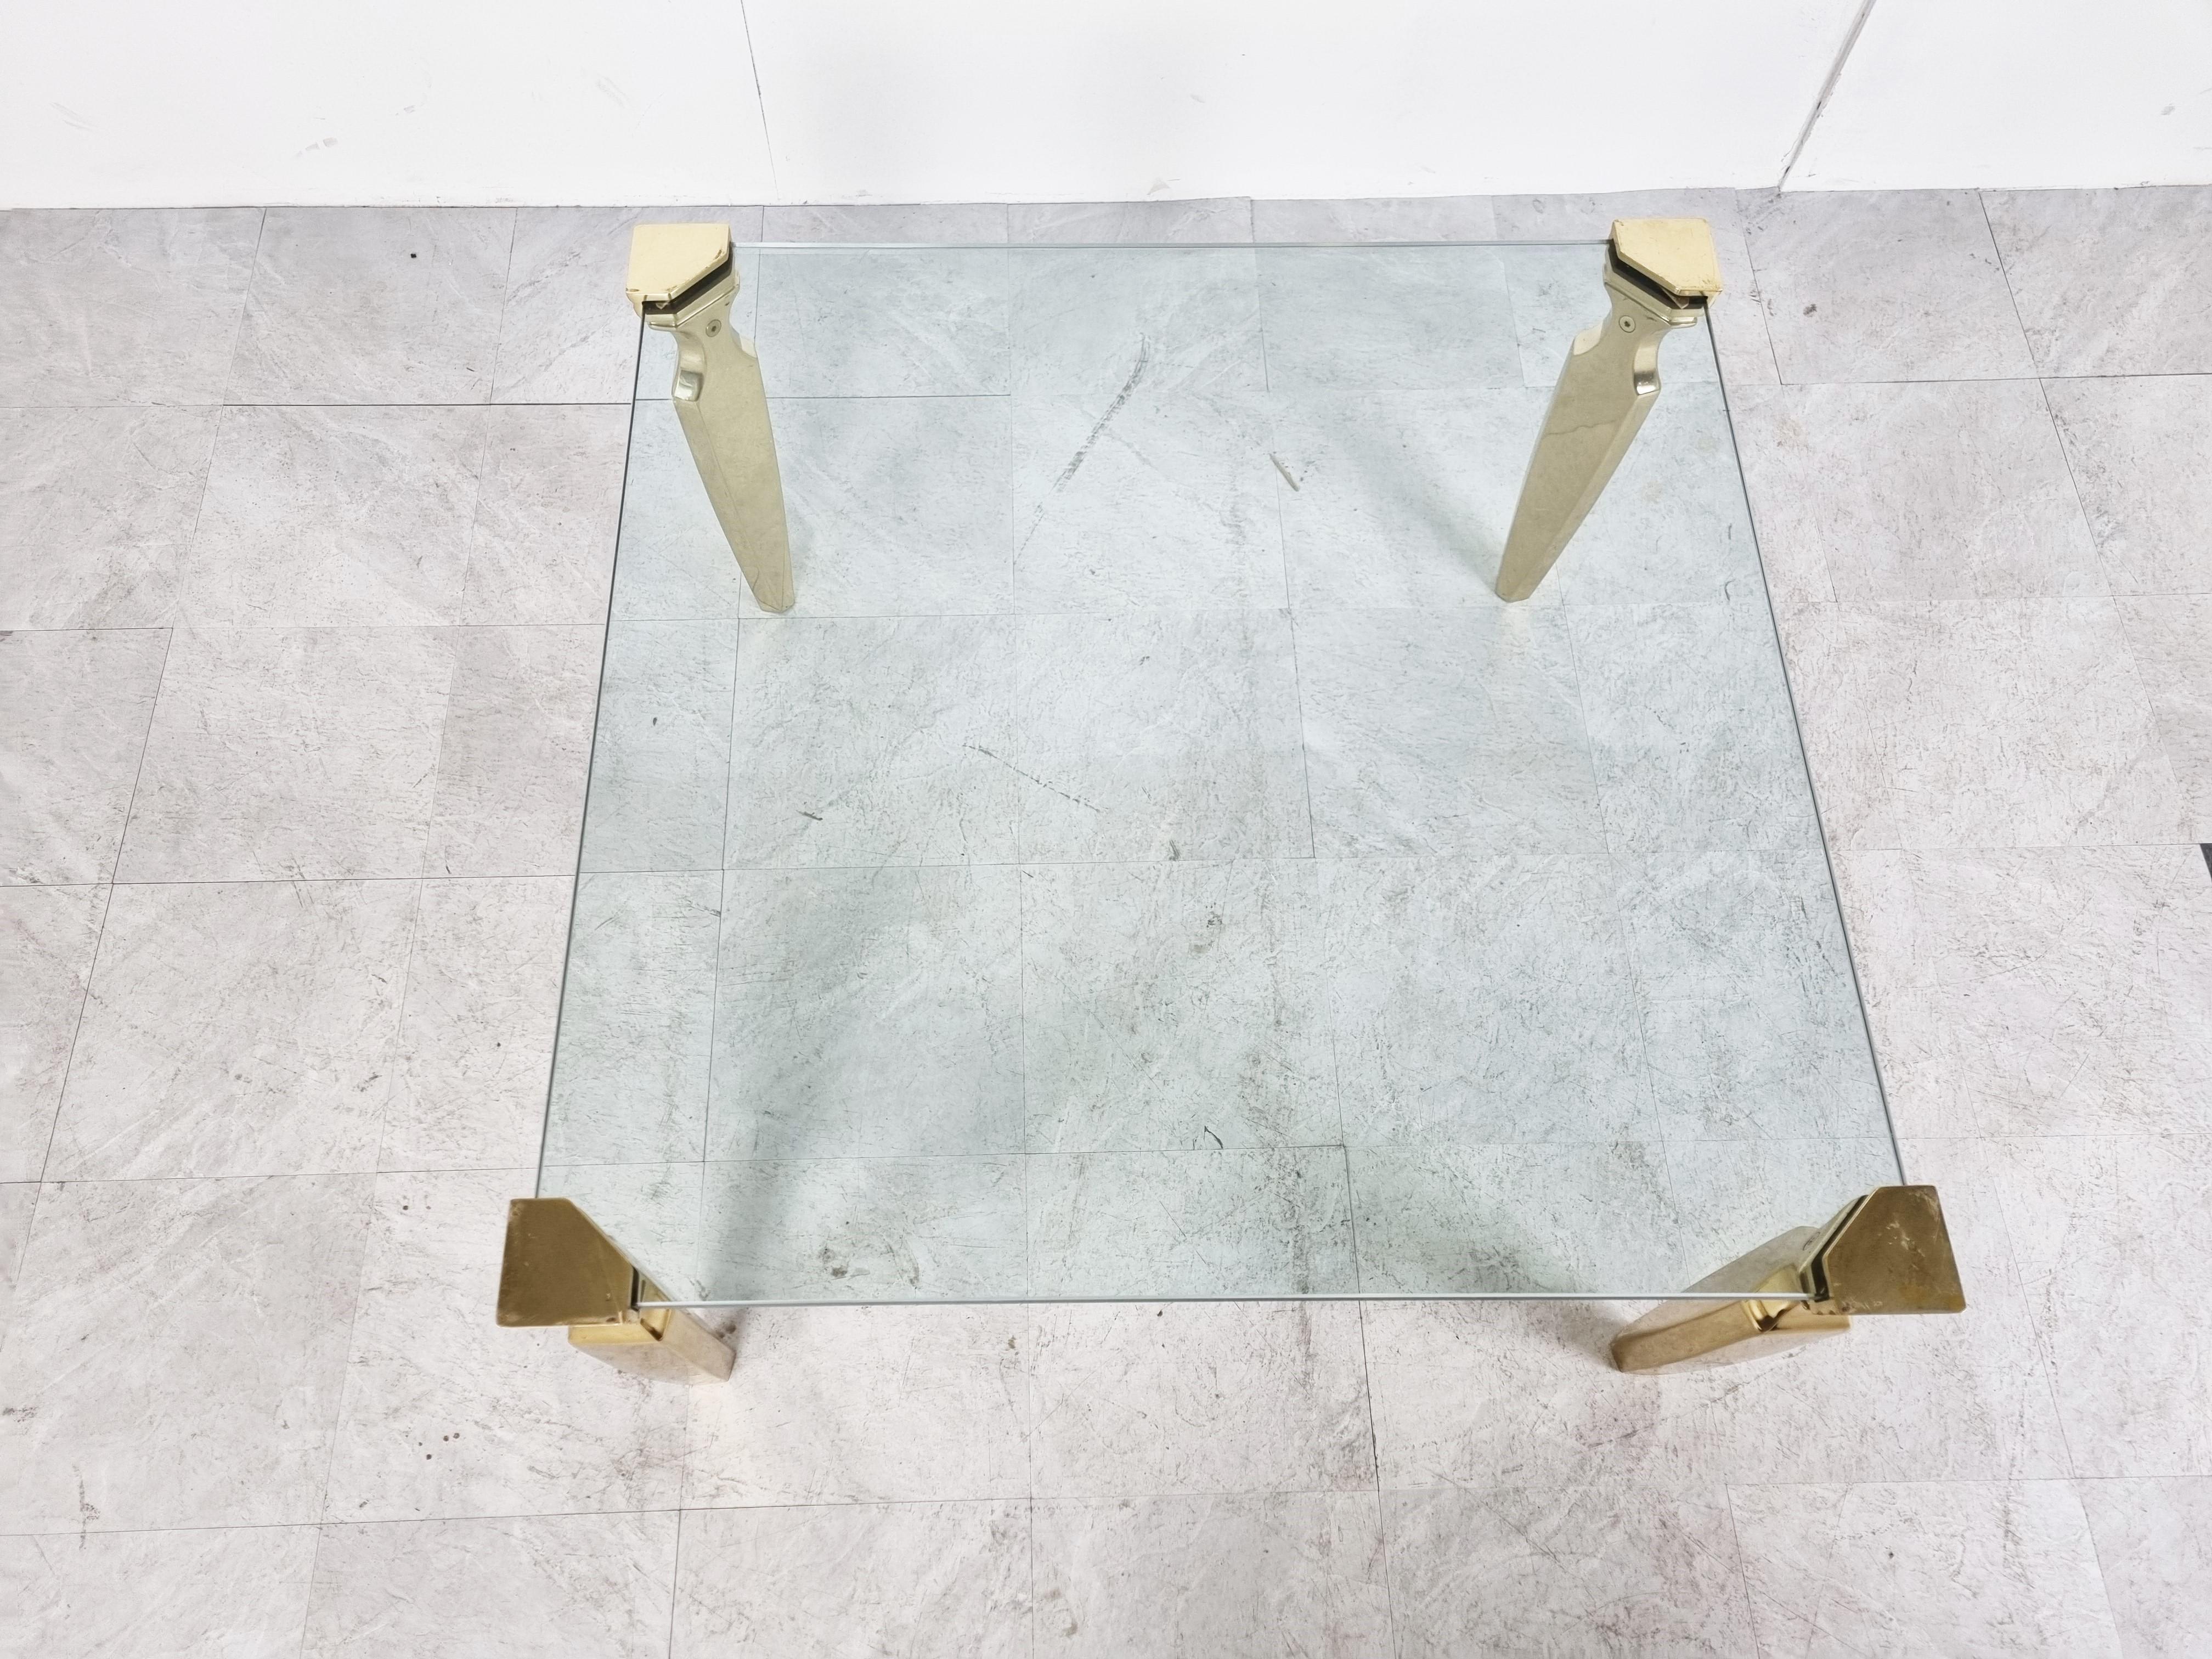 Square clear glass coffee table with elegant brass column legs.

The table has the same design features as Peter Ghyczy's coffee tables. the glass is clamped in the corners of the legs.

Designer is unknown but what we do know is that its a